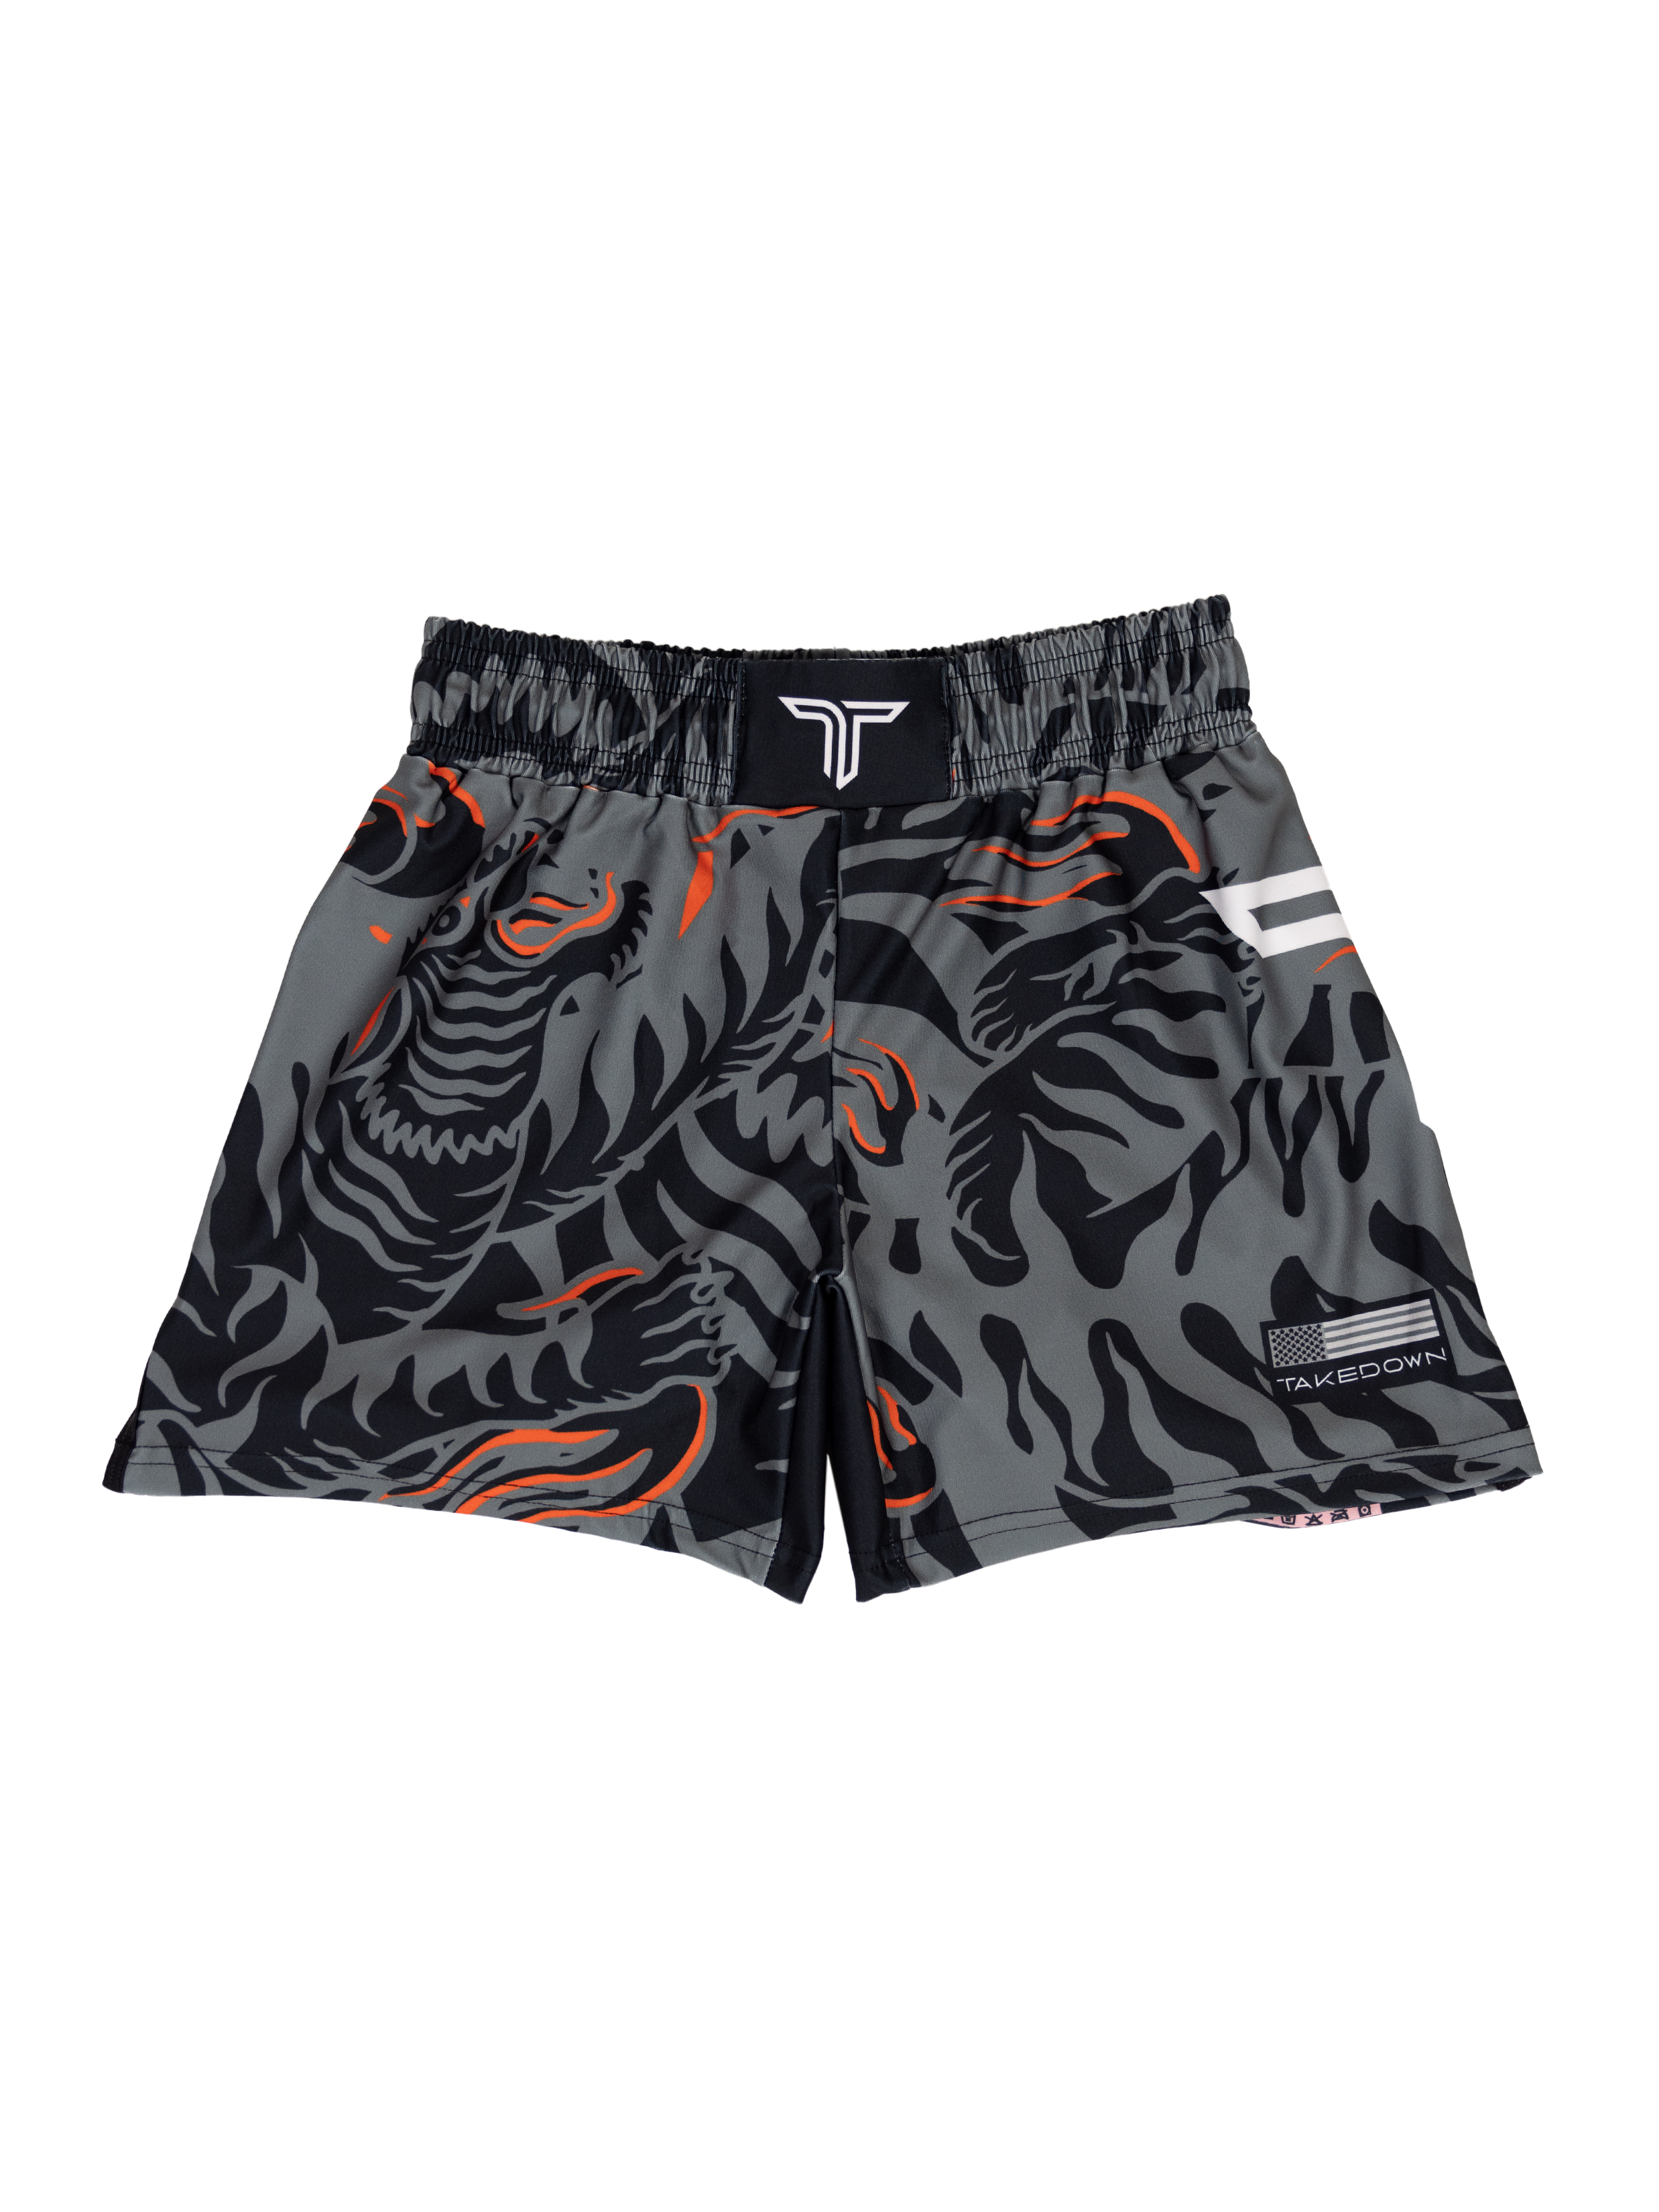 'Tiger Fight' Fight Shorts - Fire Grey (5